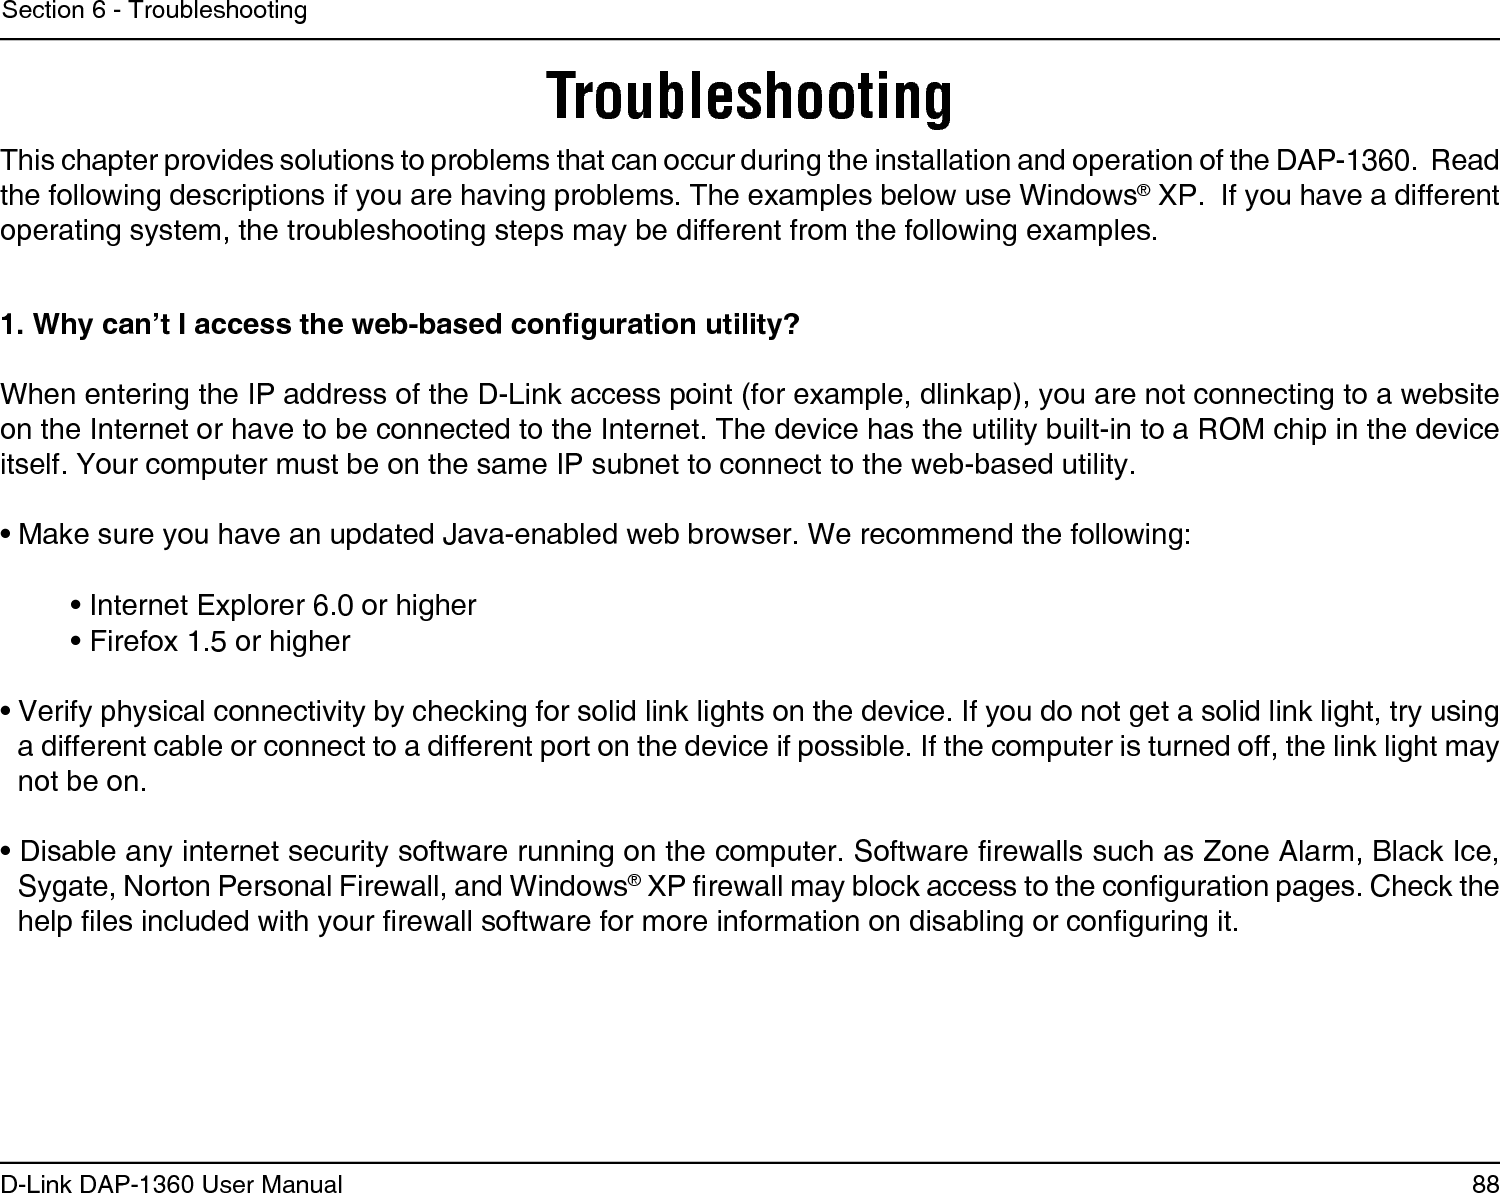 88D-Link DAP-1360 User ManualSection 6 - TroubleshootingTroubleshootingThis chapter provides solutions to problems that can occur during the installation and operation of the DAP-1360.  Read the following descriptions if you are having problems. The examples below use Windows® XP.  If you have a different operating system, the troubleshooting steps may be different from the following examples.1. Why can’t I access the web-based conguration utility?When entering the IP address of the D-Link access point (for example, dlinkap), you are not connecting to a website on the Internet or have to be connected to the Internet. The device has the utility built-in to a ROM chip in the device itself. Your computer must be on the same IP subnet to connect to the web-based utility. • Make sure you have an updated Java-enabled web browser. We recommend the following: • Internet Explorer 6.0 or higher  • Firefox 1.5 or higher • Verify physical connectivity by checking for solid link lights on the device. If you do not get a solid link light, try using a different cable or connect to a different port on the device if possible. If the computer is turned off, the link light may not be on.• Disable any internet security software running on the computer. Software rewalls such as Zone Alarm, Black Ice, Sygate, Norton Personal Firewall, and Windows® XP rewall may block access to the conguration pages. Check the help les included with your rewall software for more information on disabling or conguring it.